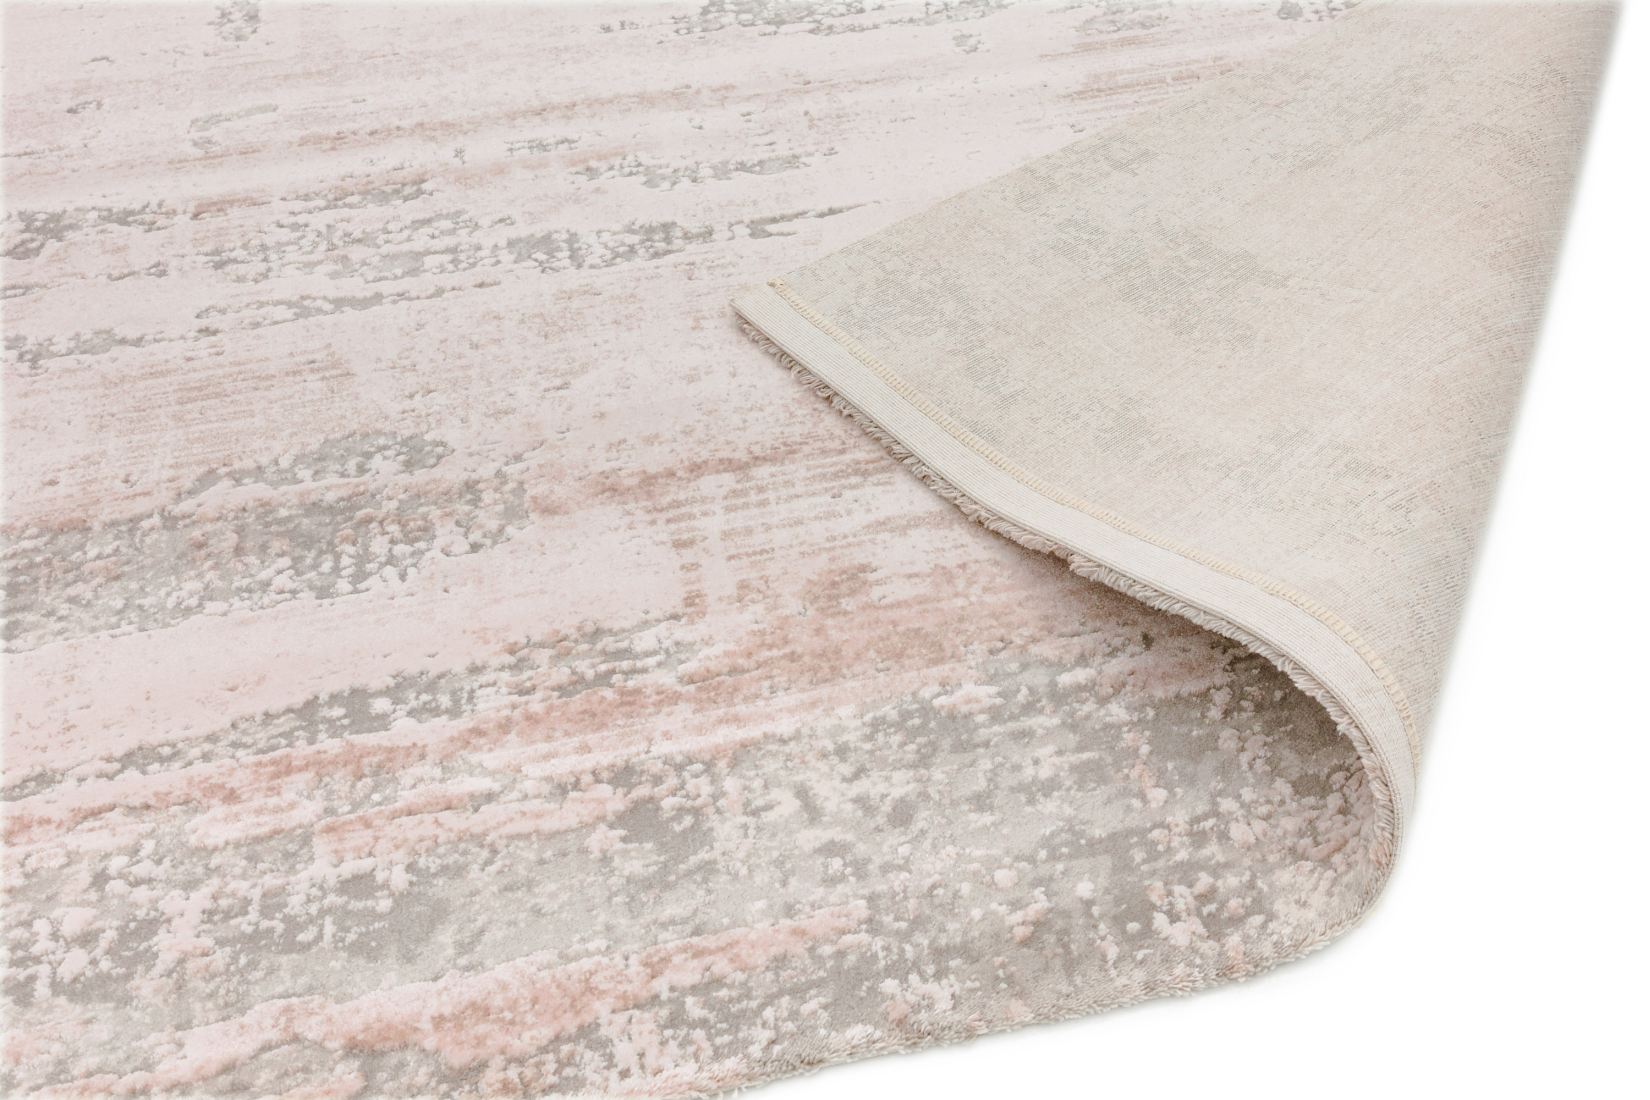 Astral Super Soft Acrylic Rug - Pearl